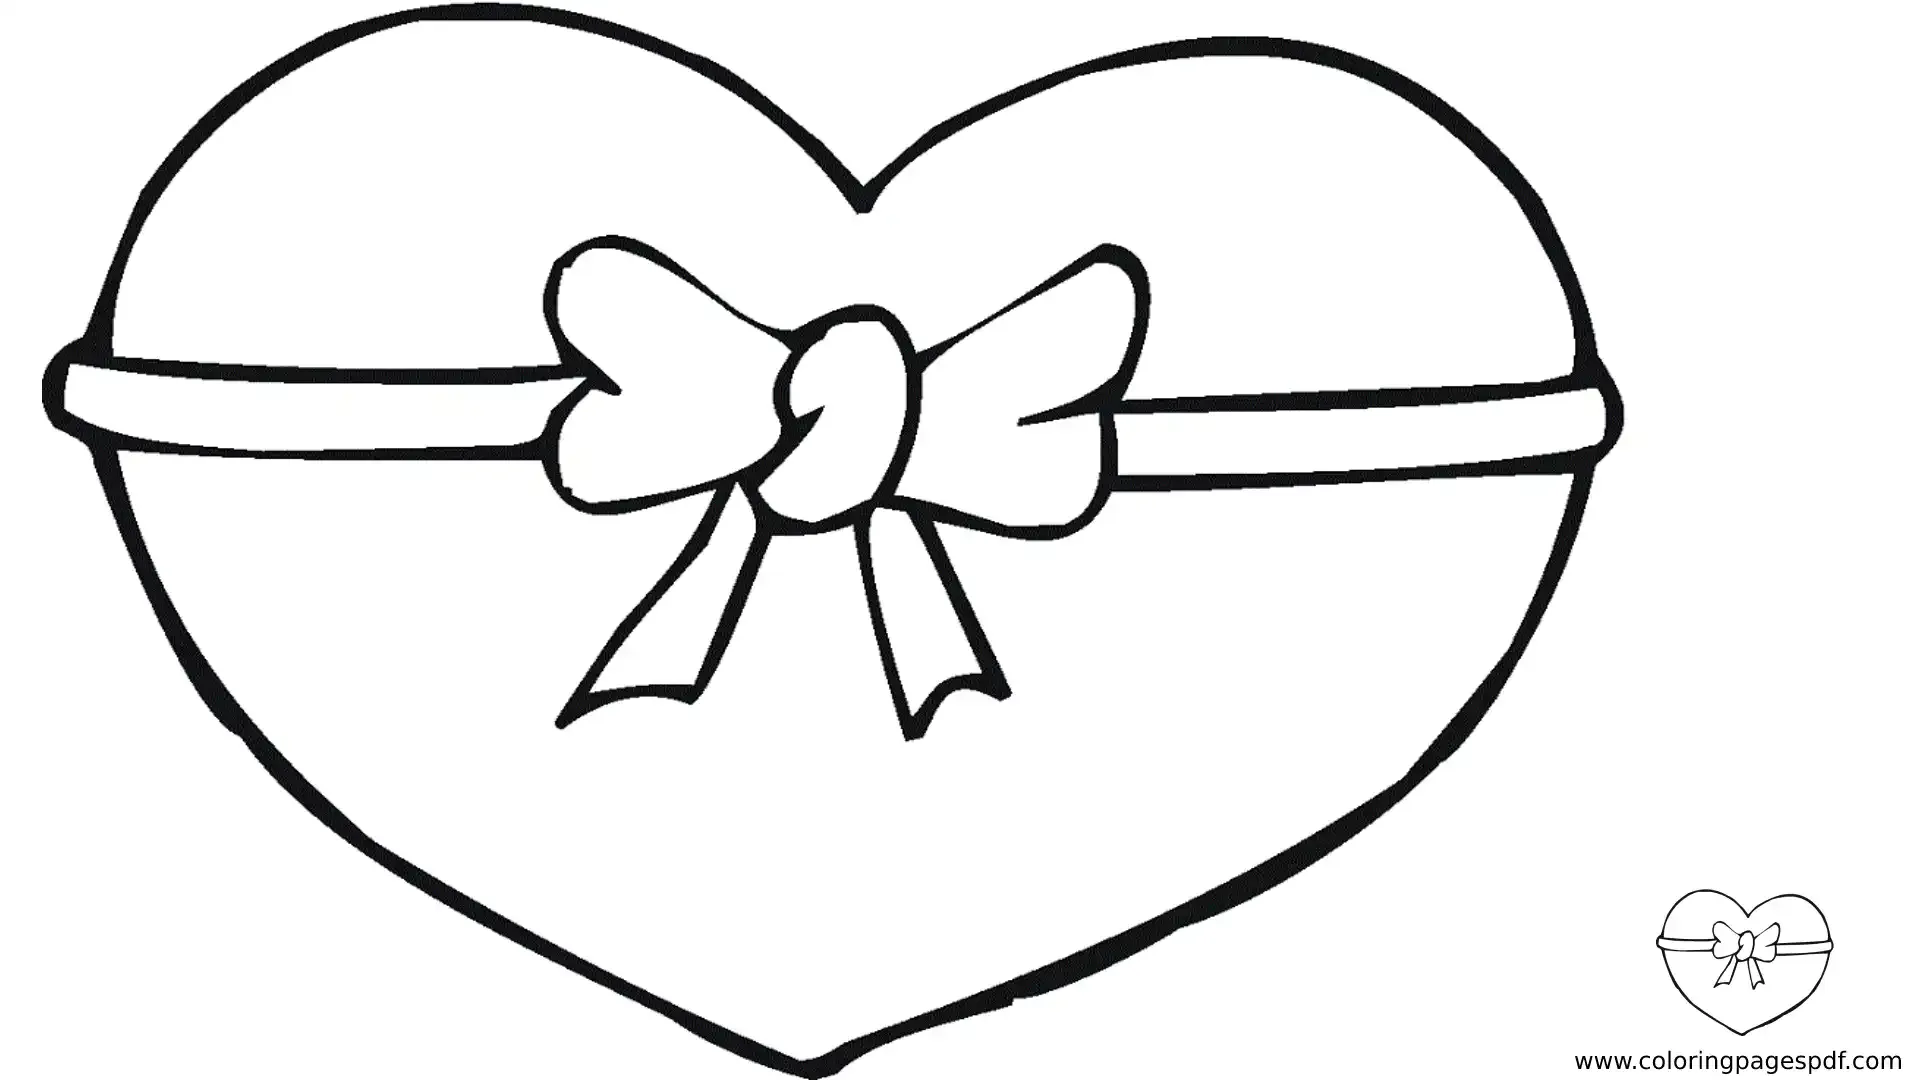 Coloring Pages Of A Heart With Ribbon